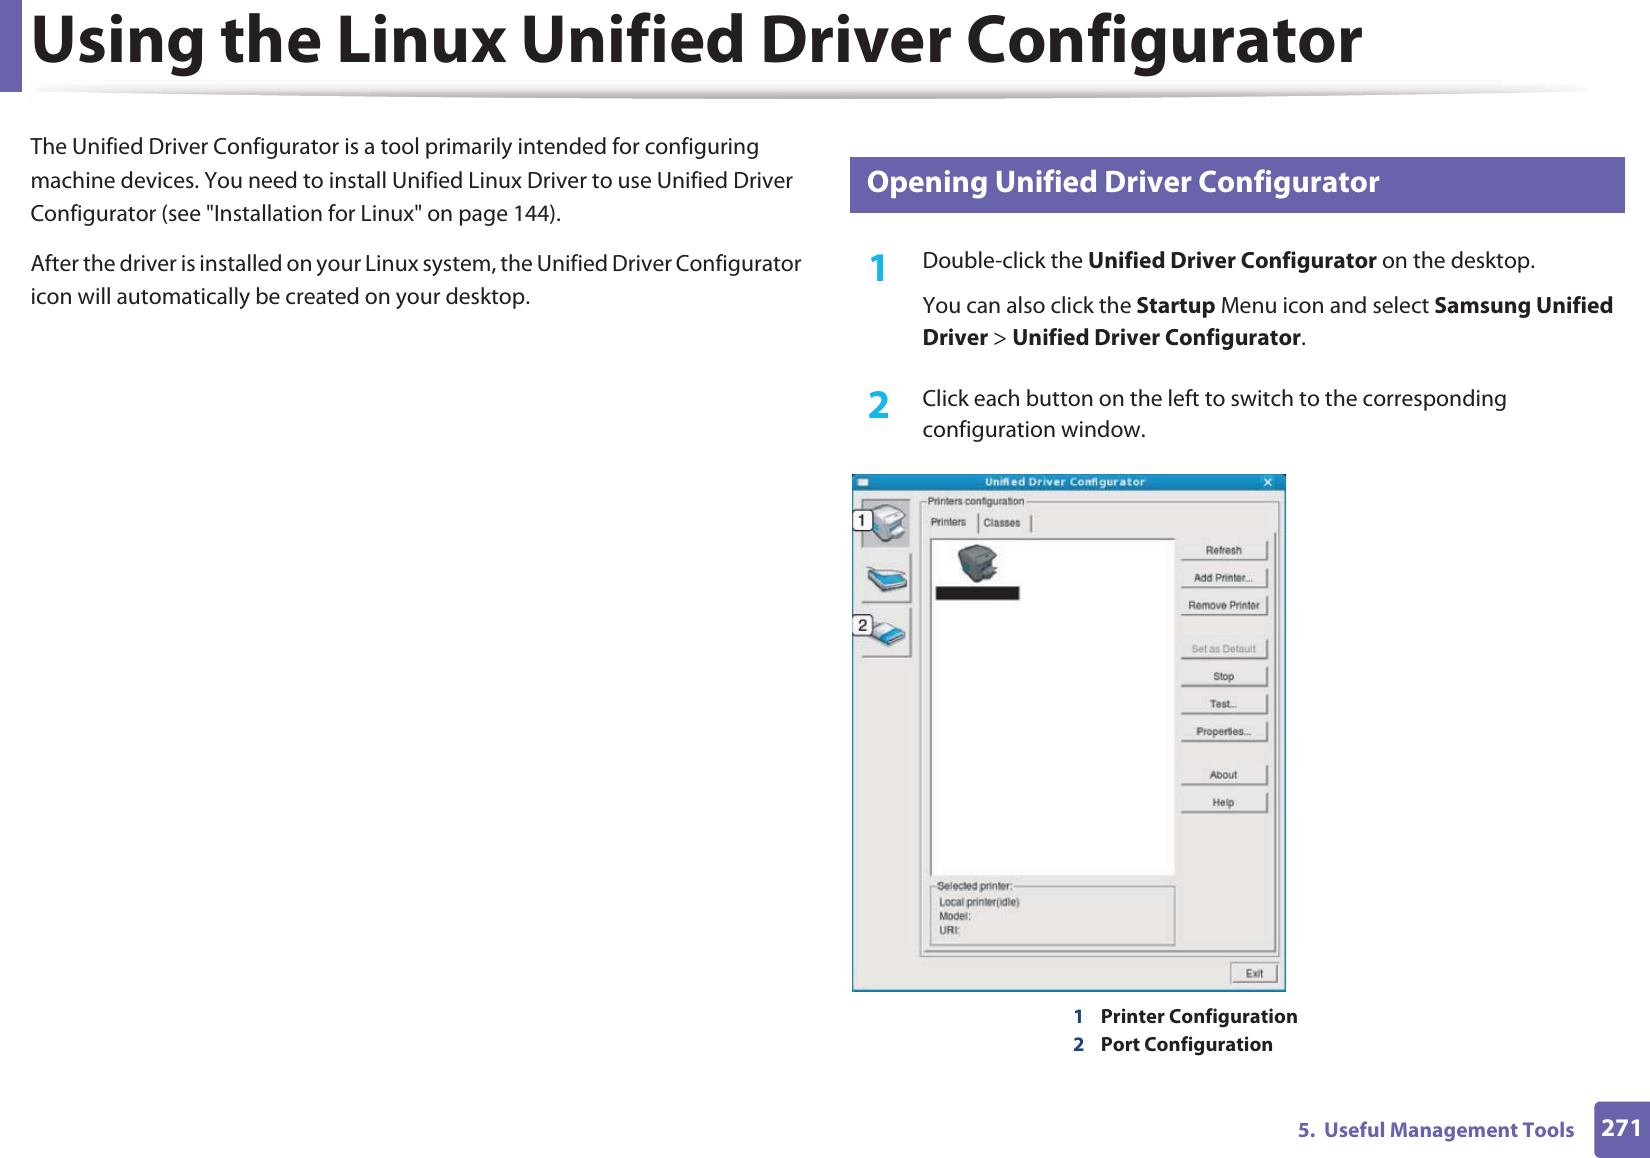 2715.  Useful Management ToolsUsing the Linux Unified Driver ConfiguratorThe Unified Driver Configurator is a tool primarily intended for configuring machine devices. You need to install Unified Linux Driver to use Unified Driver Configurator (see &quot;Installation for Linux&quot; on page 144).After the driver is installed on your Linux system, the Unified Driver Configurator icon will automatically be created on your desktop.10 Opening Unified Driver Configurator1Double-click the Unified Driver Configurator on the desktop.You can also click the Startup Menu icon and select Samsung Unified Driver &gt; Unified Driver Configurator.2  Click each button on the left to switch to the corresponding configuration window.1Printer Configuration 2Port Configuration 